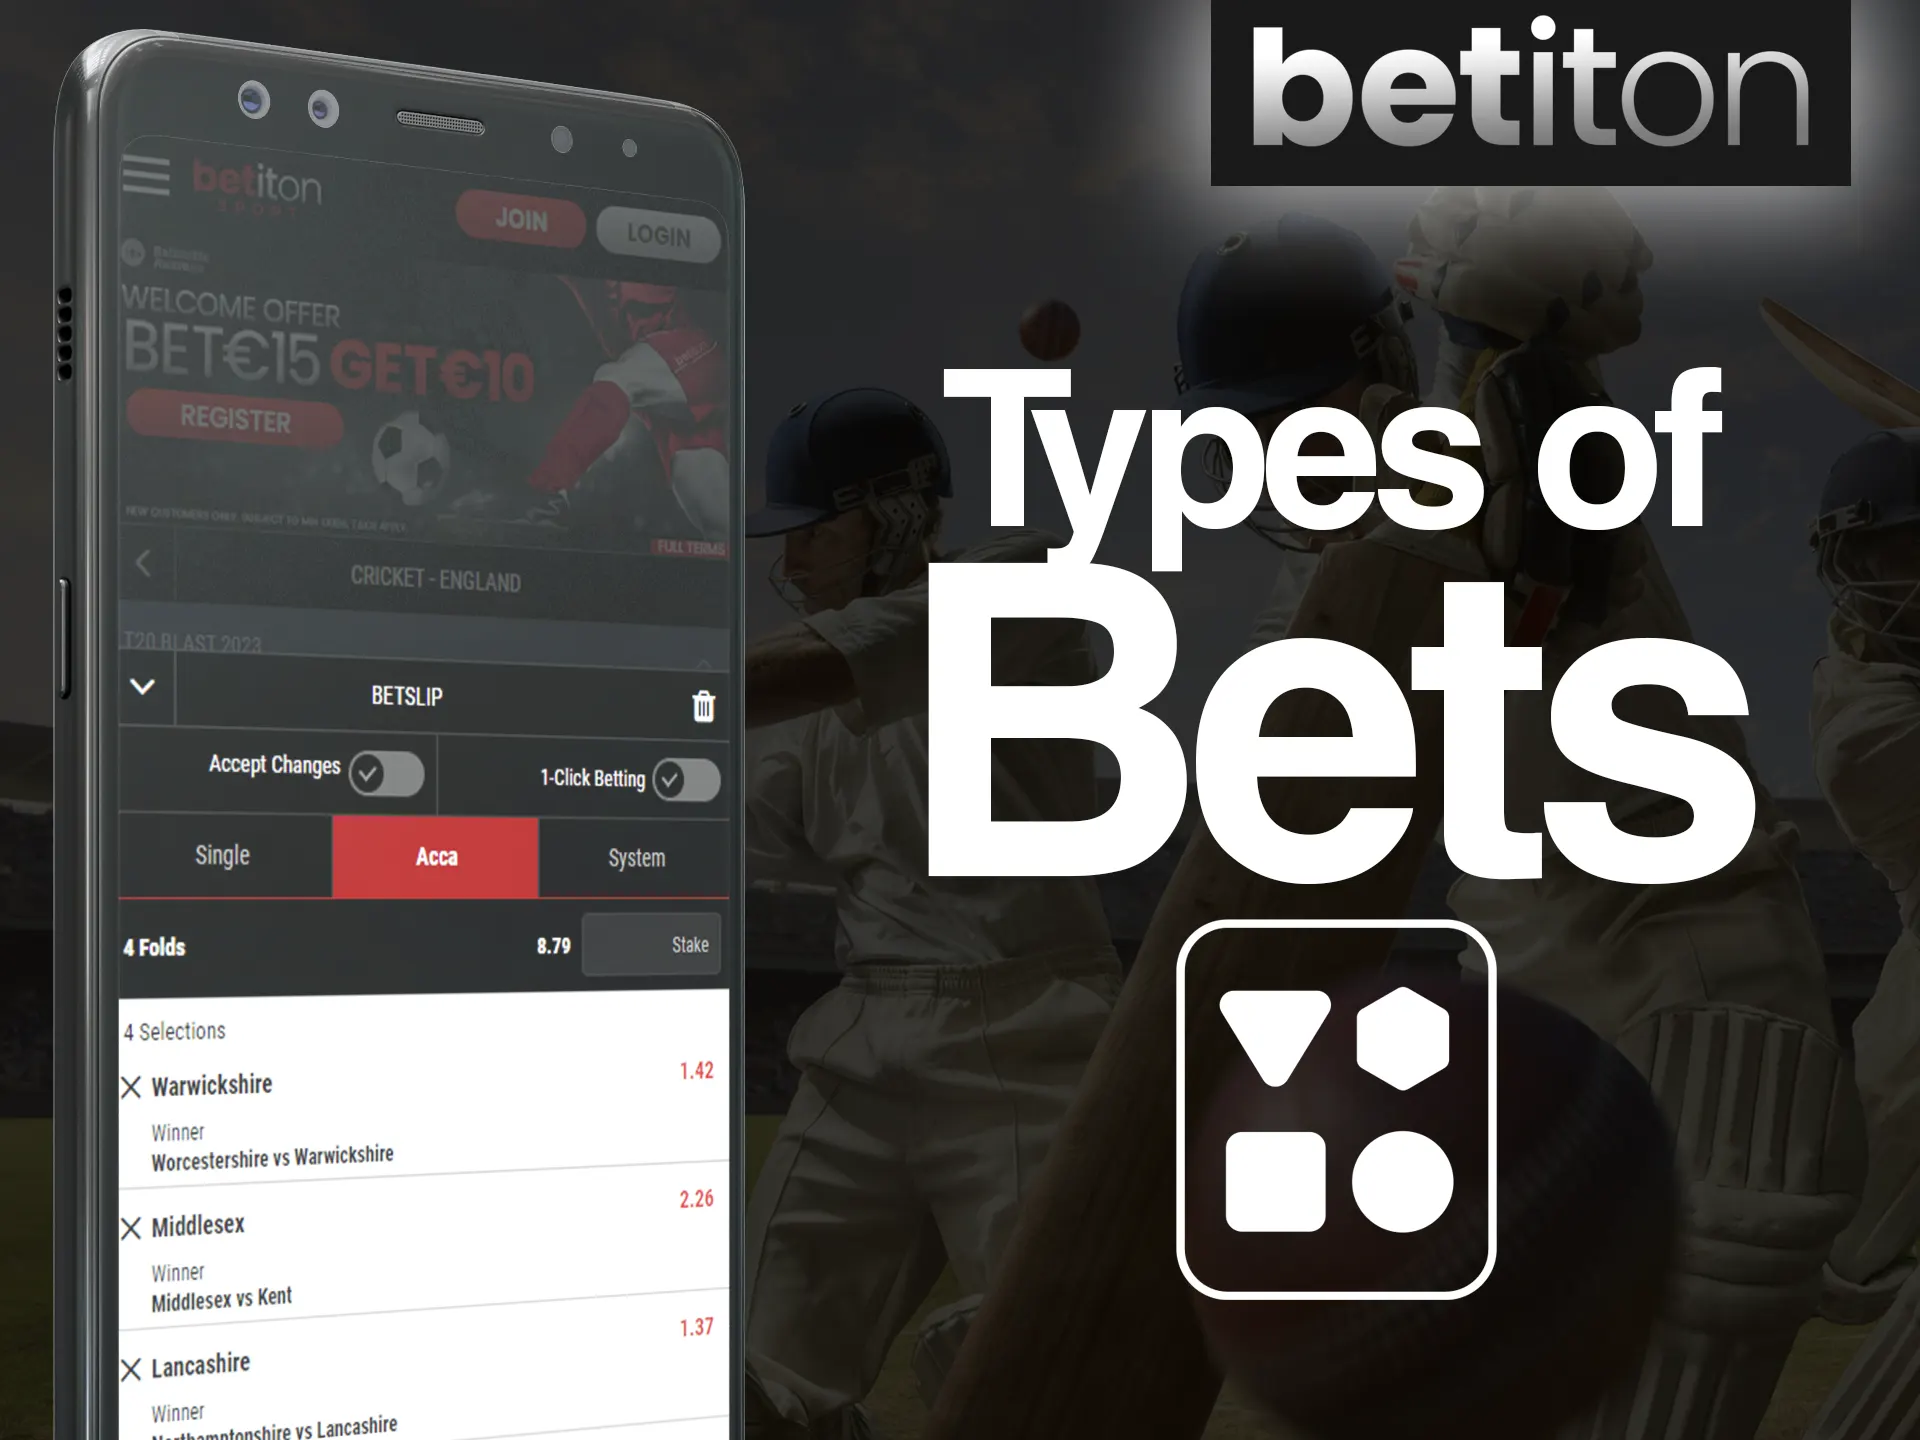 Learn more about different bet types in the Betiton app.